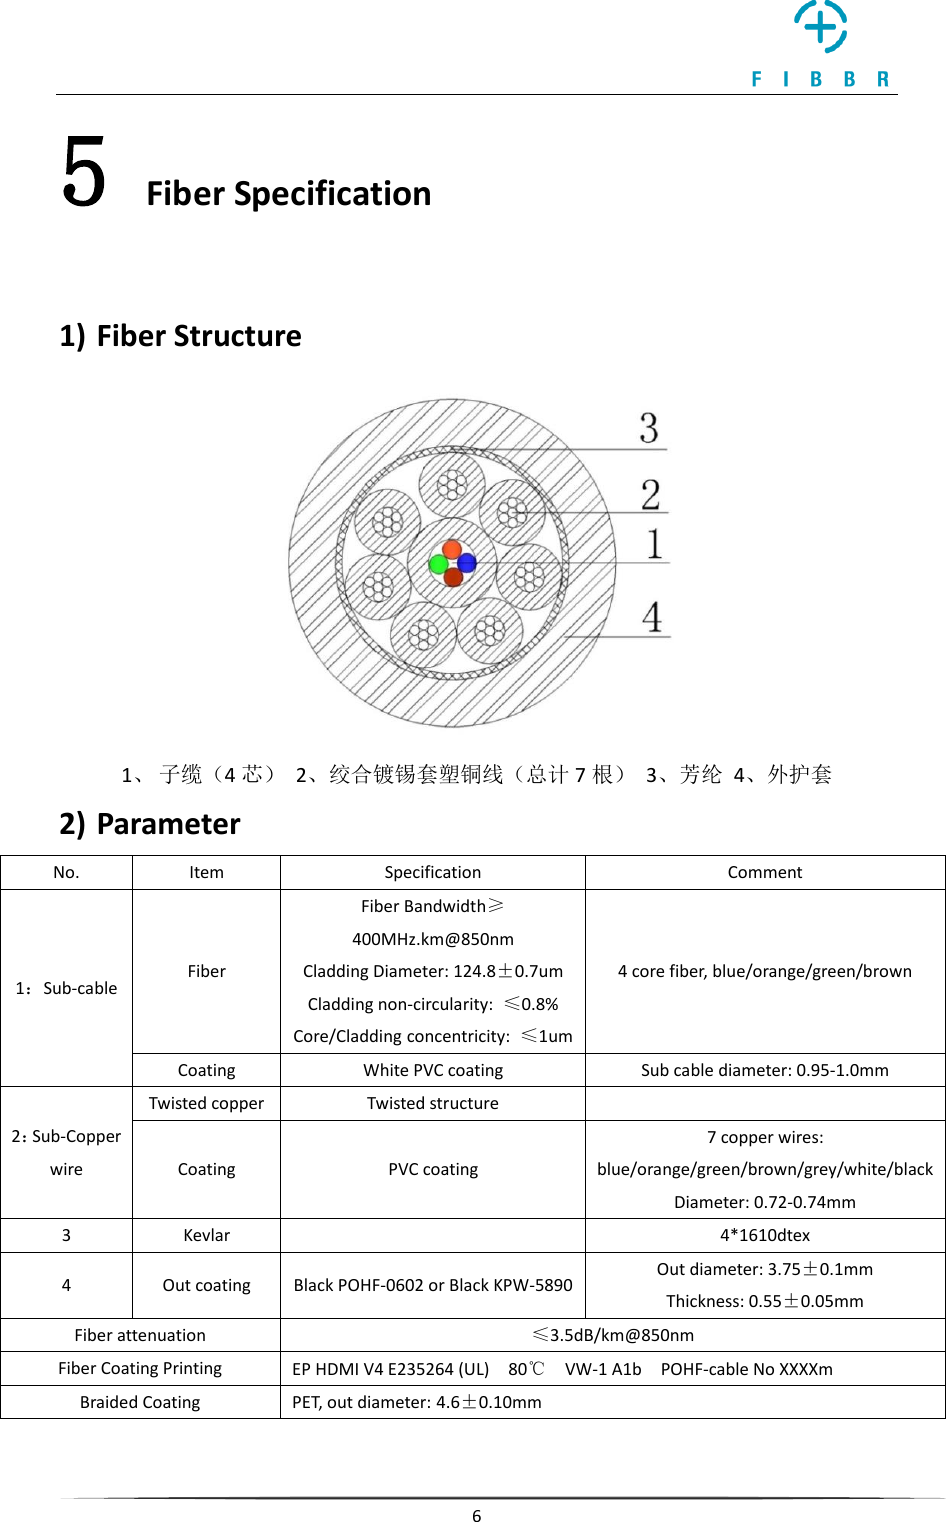     6  5 Fiber Specification  1) Fiber Structure  1、 子缆（4芯）  2、绞合镀锡套塑铜线（总计 7根）  3、芳纶  4、外护套 2) Parameter No. Item Specification Comment 1：Sub-cable Fiber Fiber Bandwidth≥400MHz.km@850nm Cladding Diameter: 124.8±0.7um Cladding non-circularity:  ≤0.8% Core/Cladding concentricity:  ≤1um 4 core fiber, blue/orange/green/brown   Coating White PVC coating Sub cable diameter: 0.95-1.0mm   2：Sub-Copper wire Twisted copper Twisted structure  Coating PVC coating 7 copper wires: blue/orange/green/brown/grey/white/black Diameter: 0.72-0.74mm 3 Kevlar  4*1610dtex 4 Out coating Black POHF-0602 or Black KPW-5890 Out diameter: 3.75±0.1mm Thickness: 0.55±0.05mm Fiber attenuation ≤3.5dB/km@850nm Fiber Coating Printing EP HDMI V4 E235264 (UL)    80℃  VW-1 A1b    POHF-cable No XXXXm Braided Coating PET, out diameter: 4.6±0.10mm  